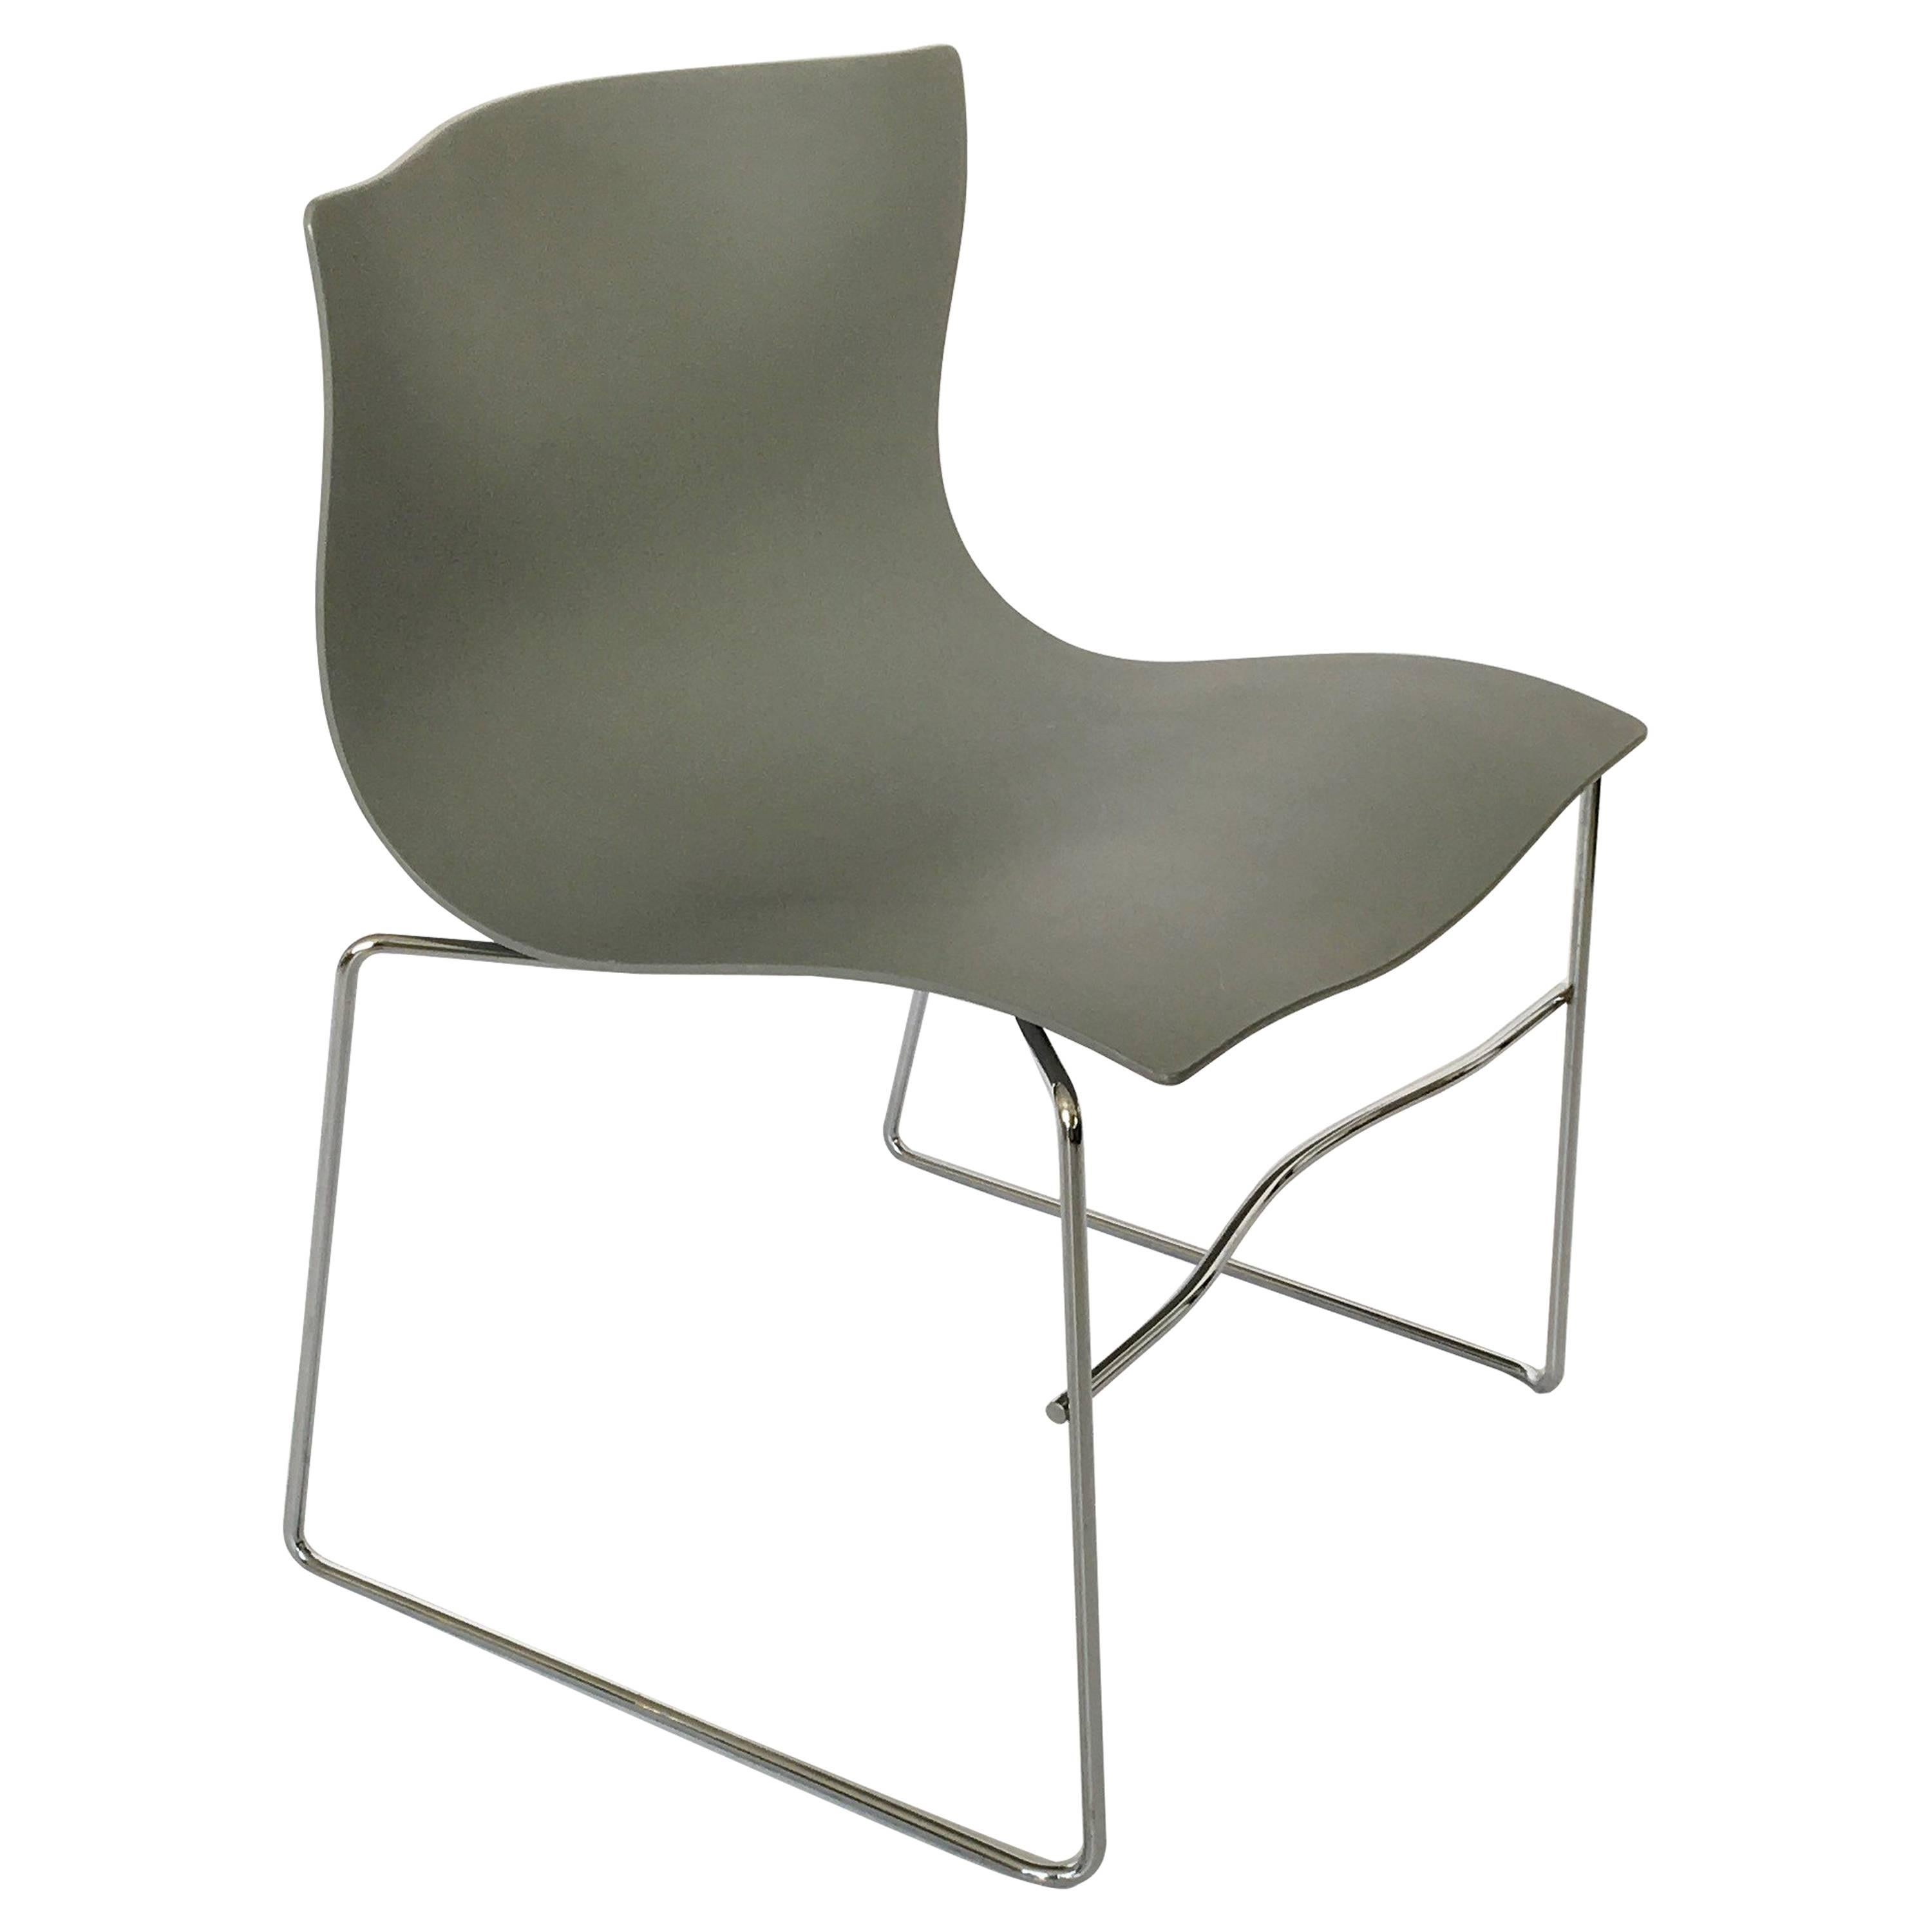 Twenty (20) vintage modernist stackable “Handkerchief” chairs by designer Massimo Vignelli for Knoll. It features a seat in one molded piece of metal, “intended to evoke the windblown contours of a handkerchief floating through the air”, with a gray